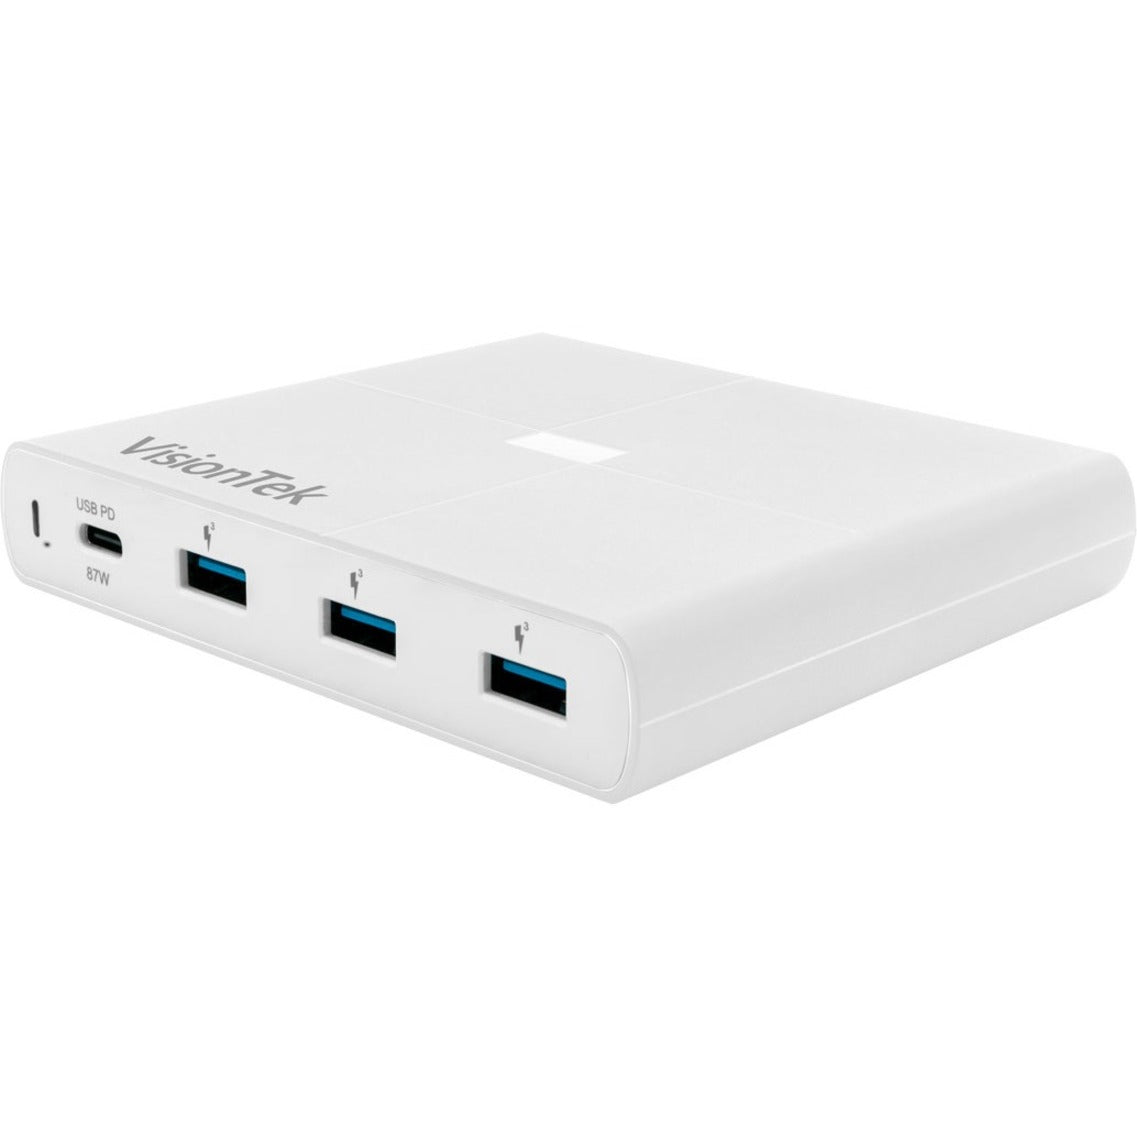 VisionTek 901285 USB-C 90W Charger with USB 3.0 QC, Fast Charging for Your Devices